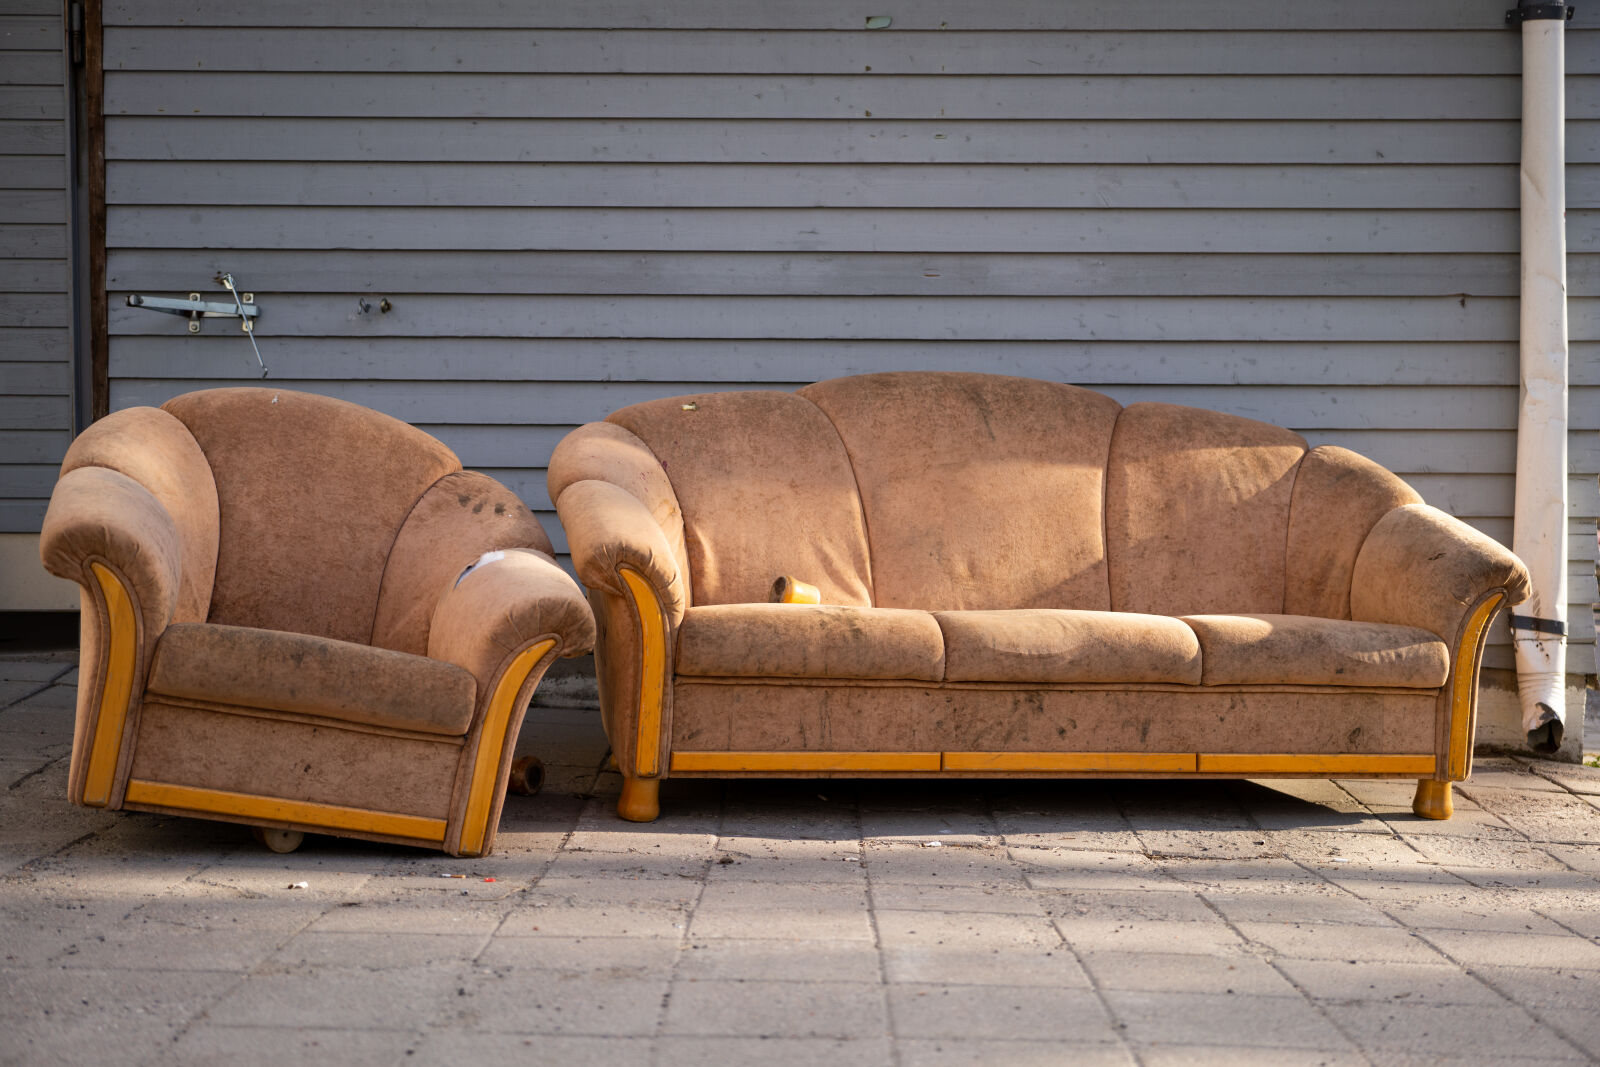 Sony a7R IV sample photo. Abandoned sofas on the photography